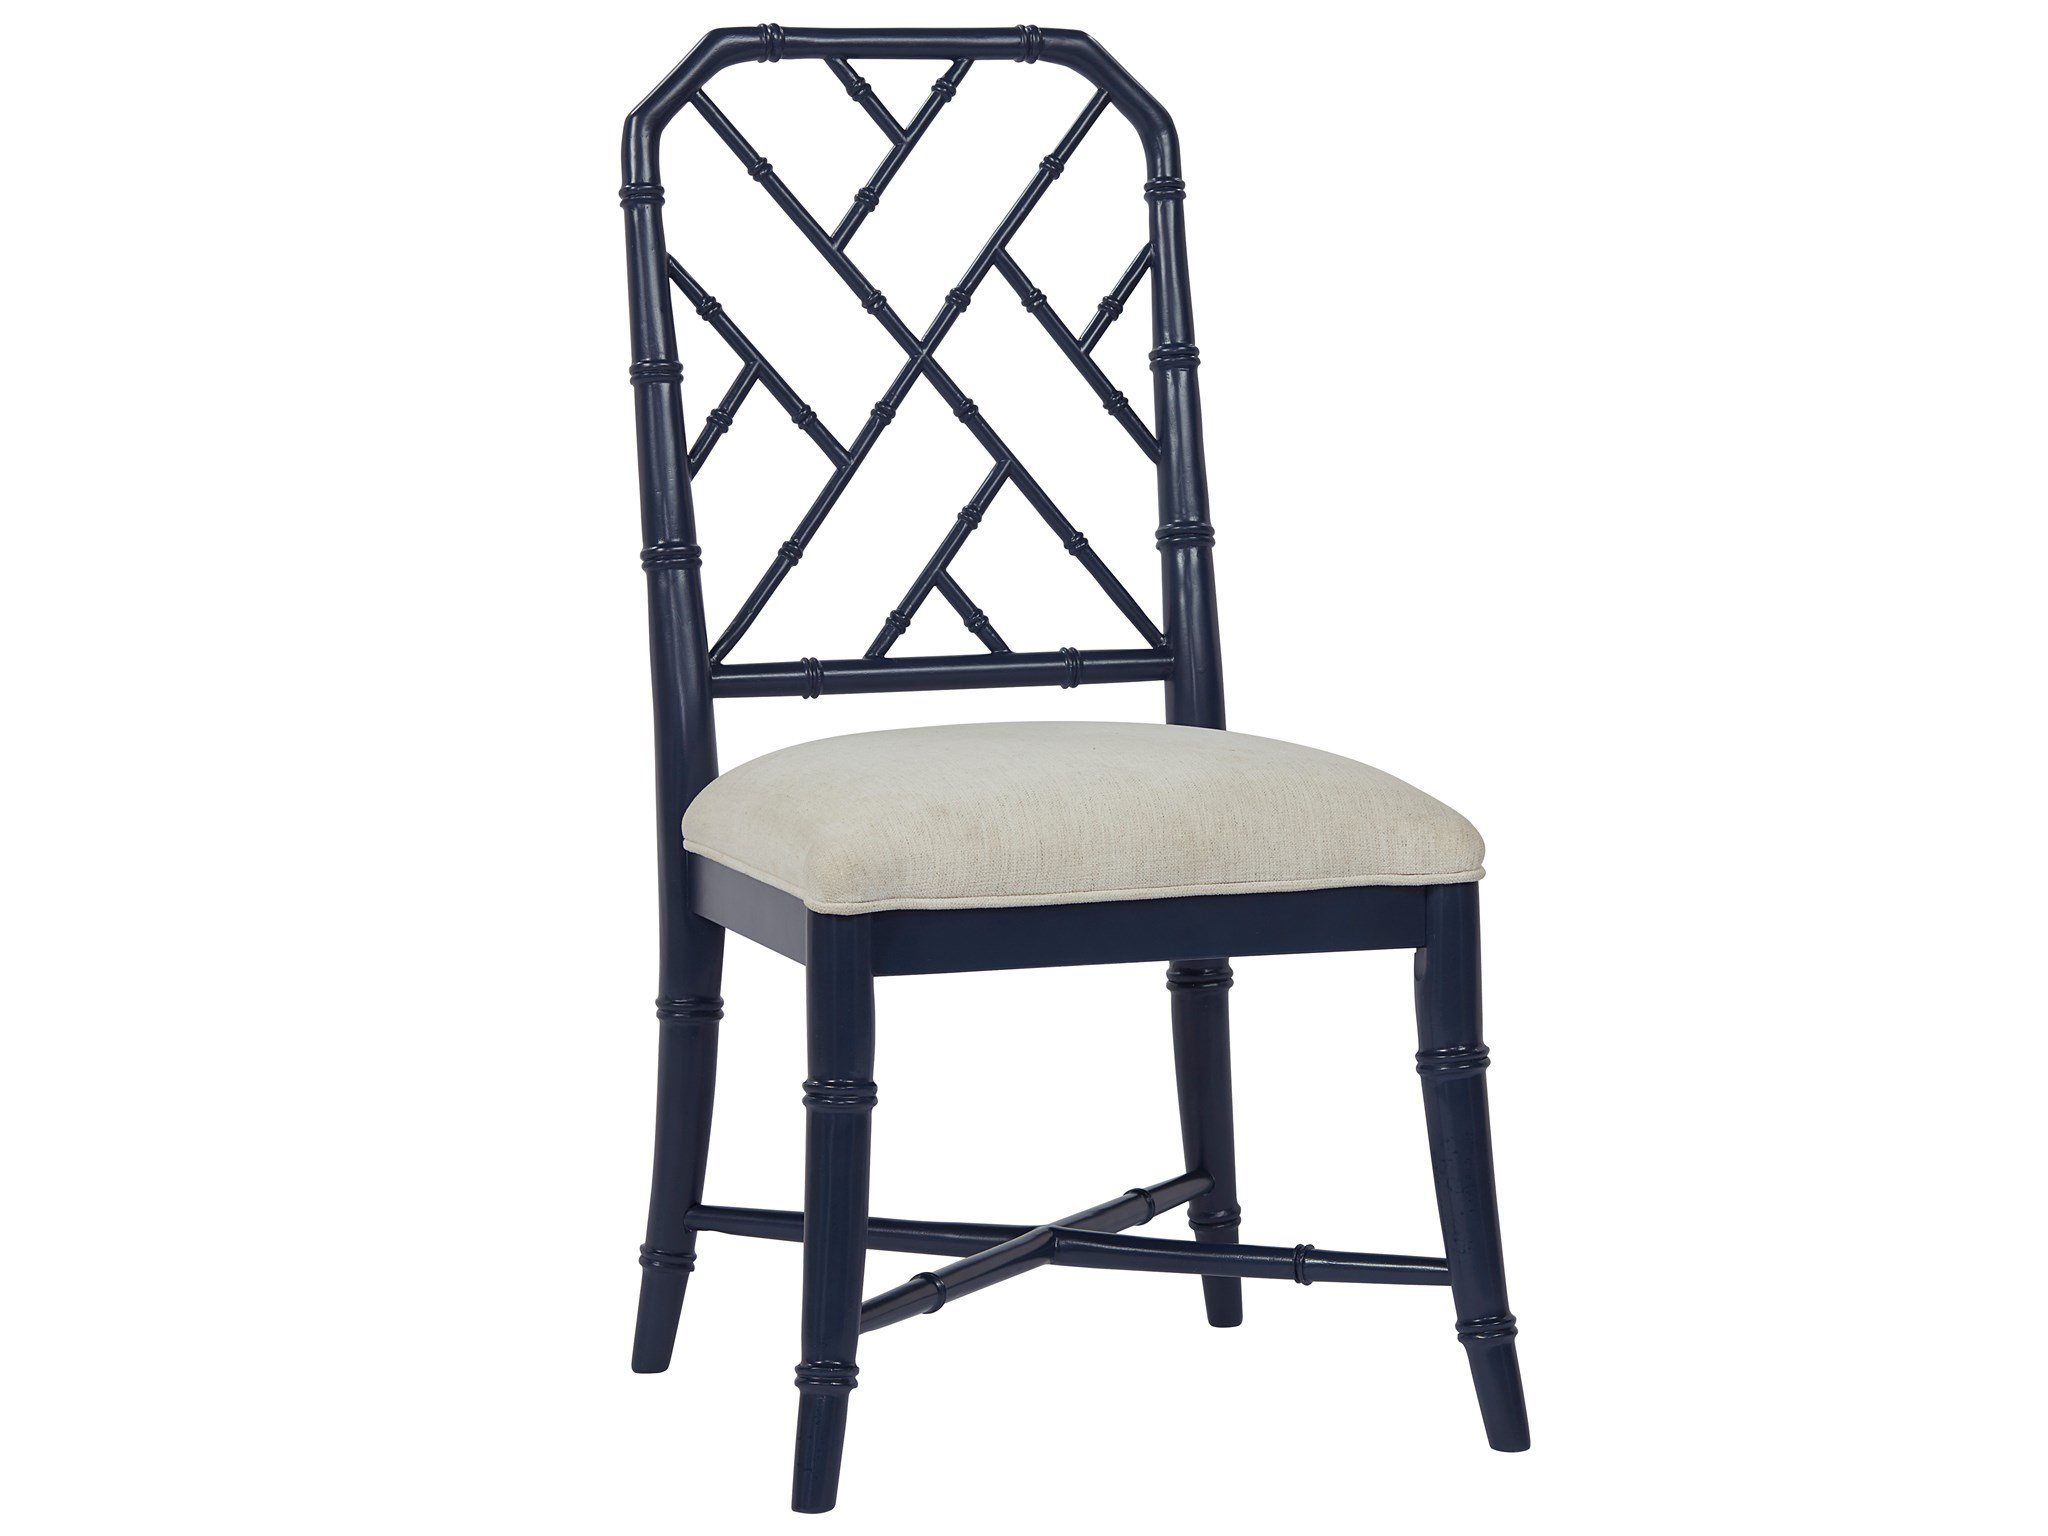 Getaway Coastal Living Home Collection Hanalei Bay Side Chair